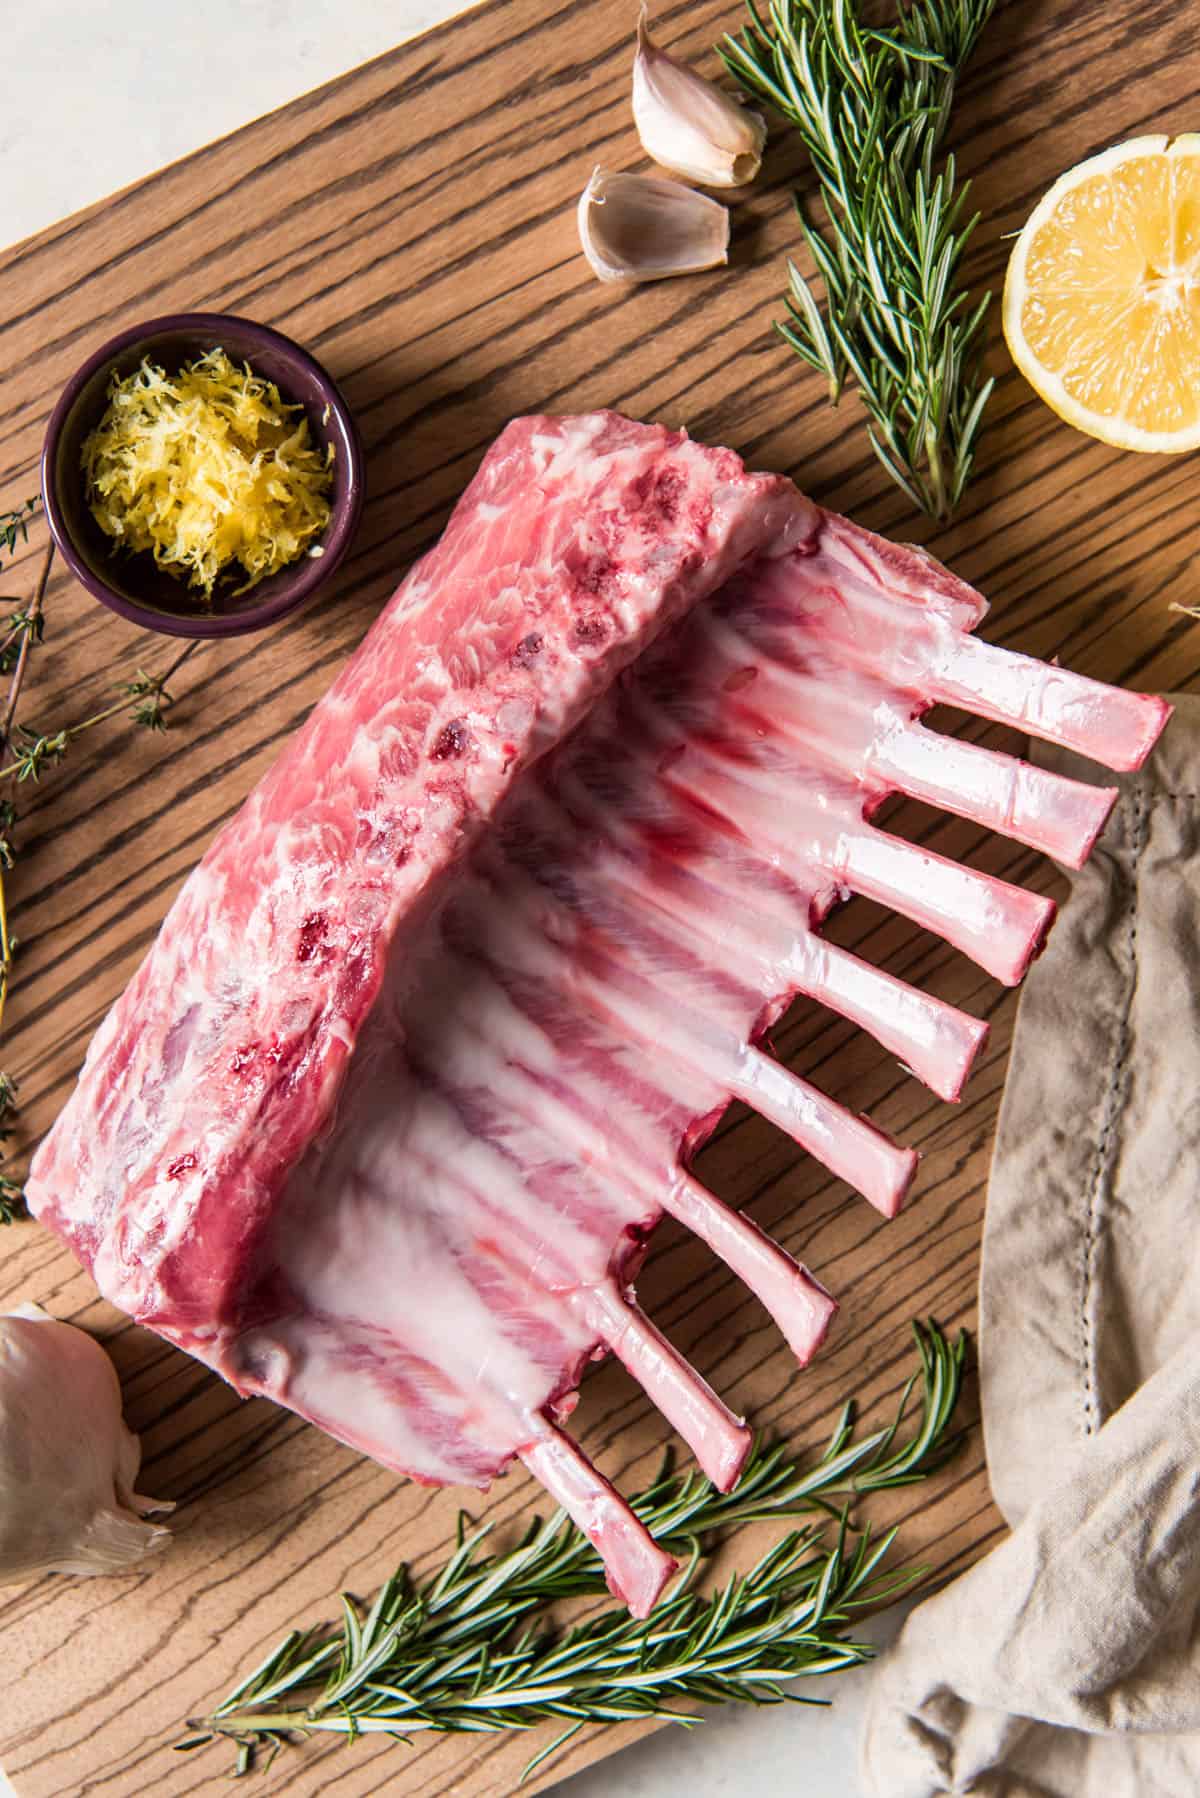 Raw rack of lamb sitting on a cutting board with other ingredients like lemon zest, garlic cloves and rosemary sprigs and ready to be prepared for roasting in the oven by first marinating.